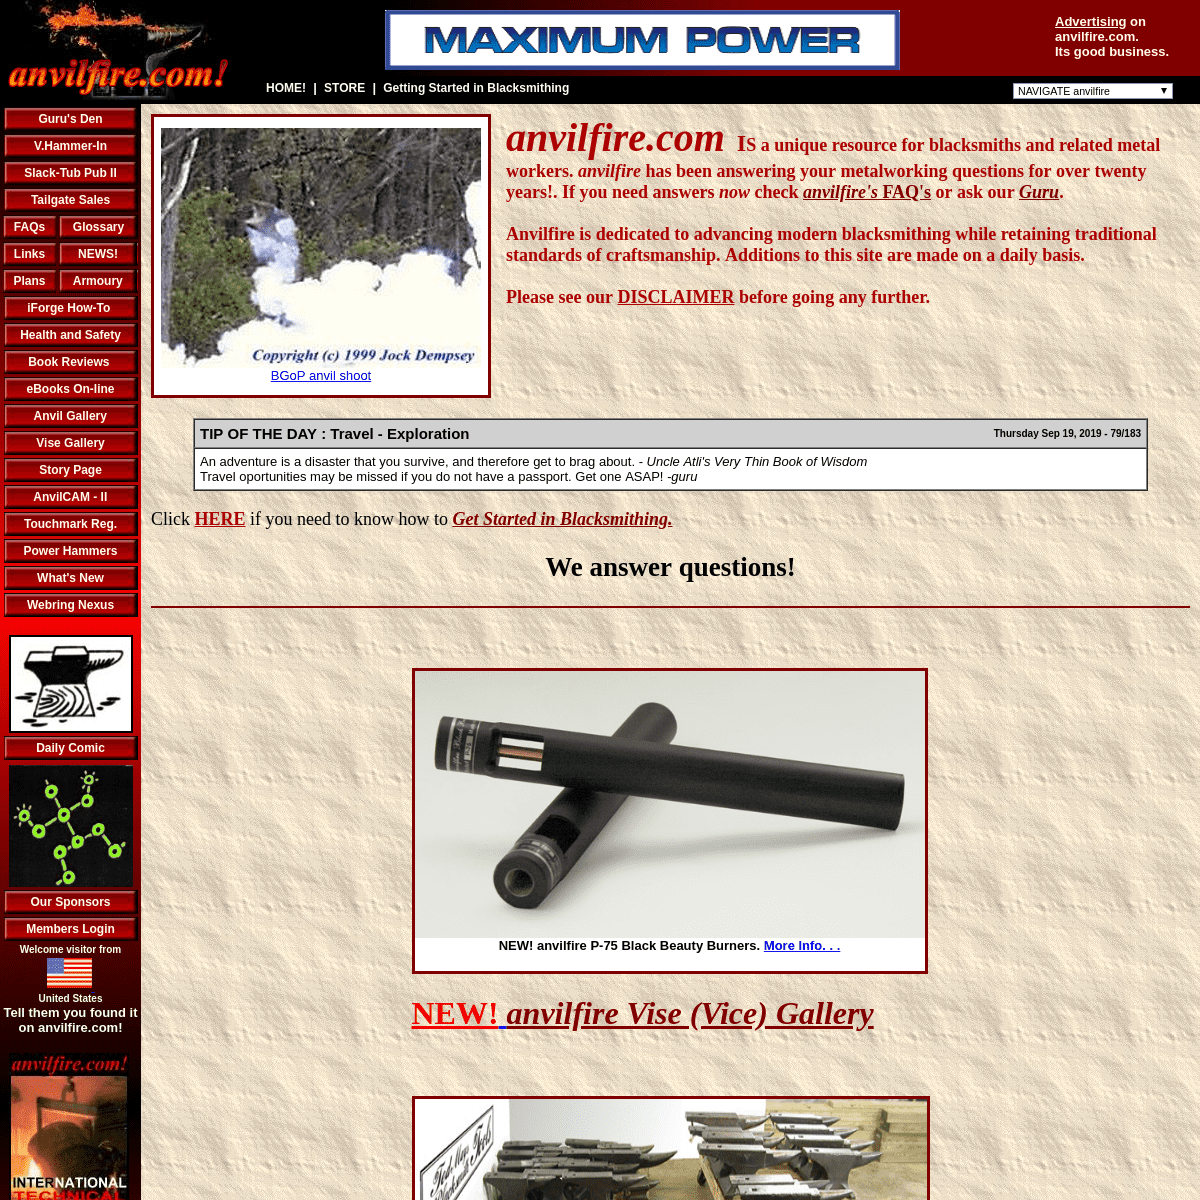 anvilfire.com - Blacksmithing and Metalworkers Reference for Metal Artists